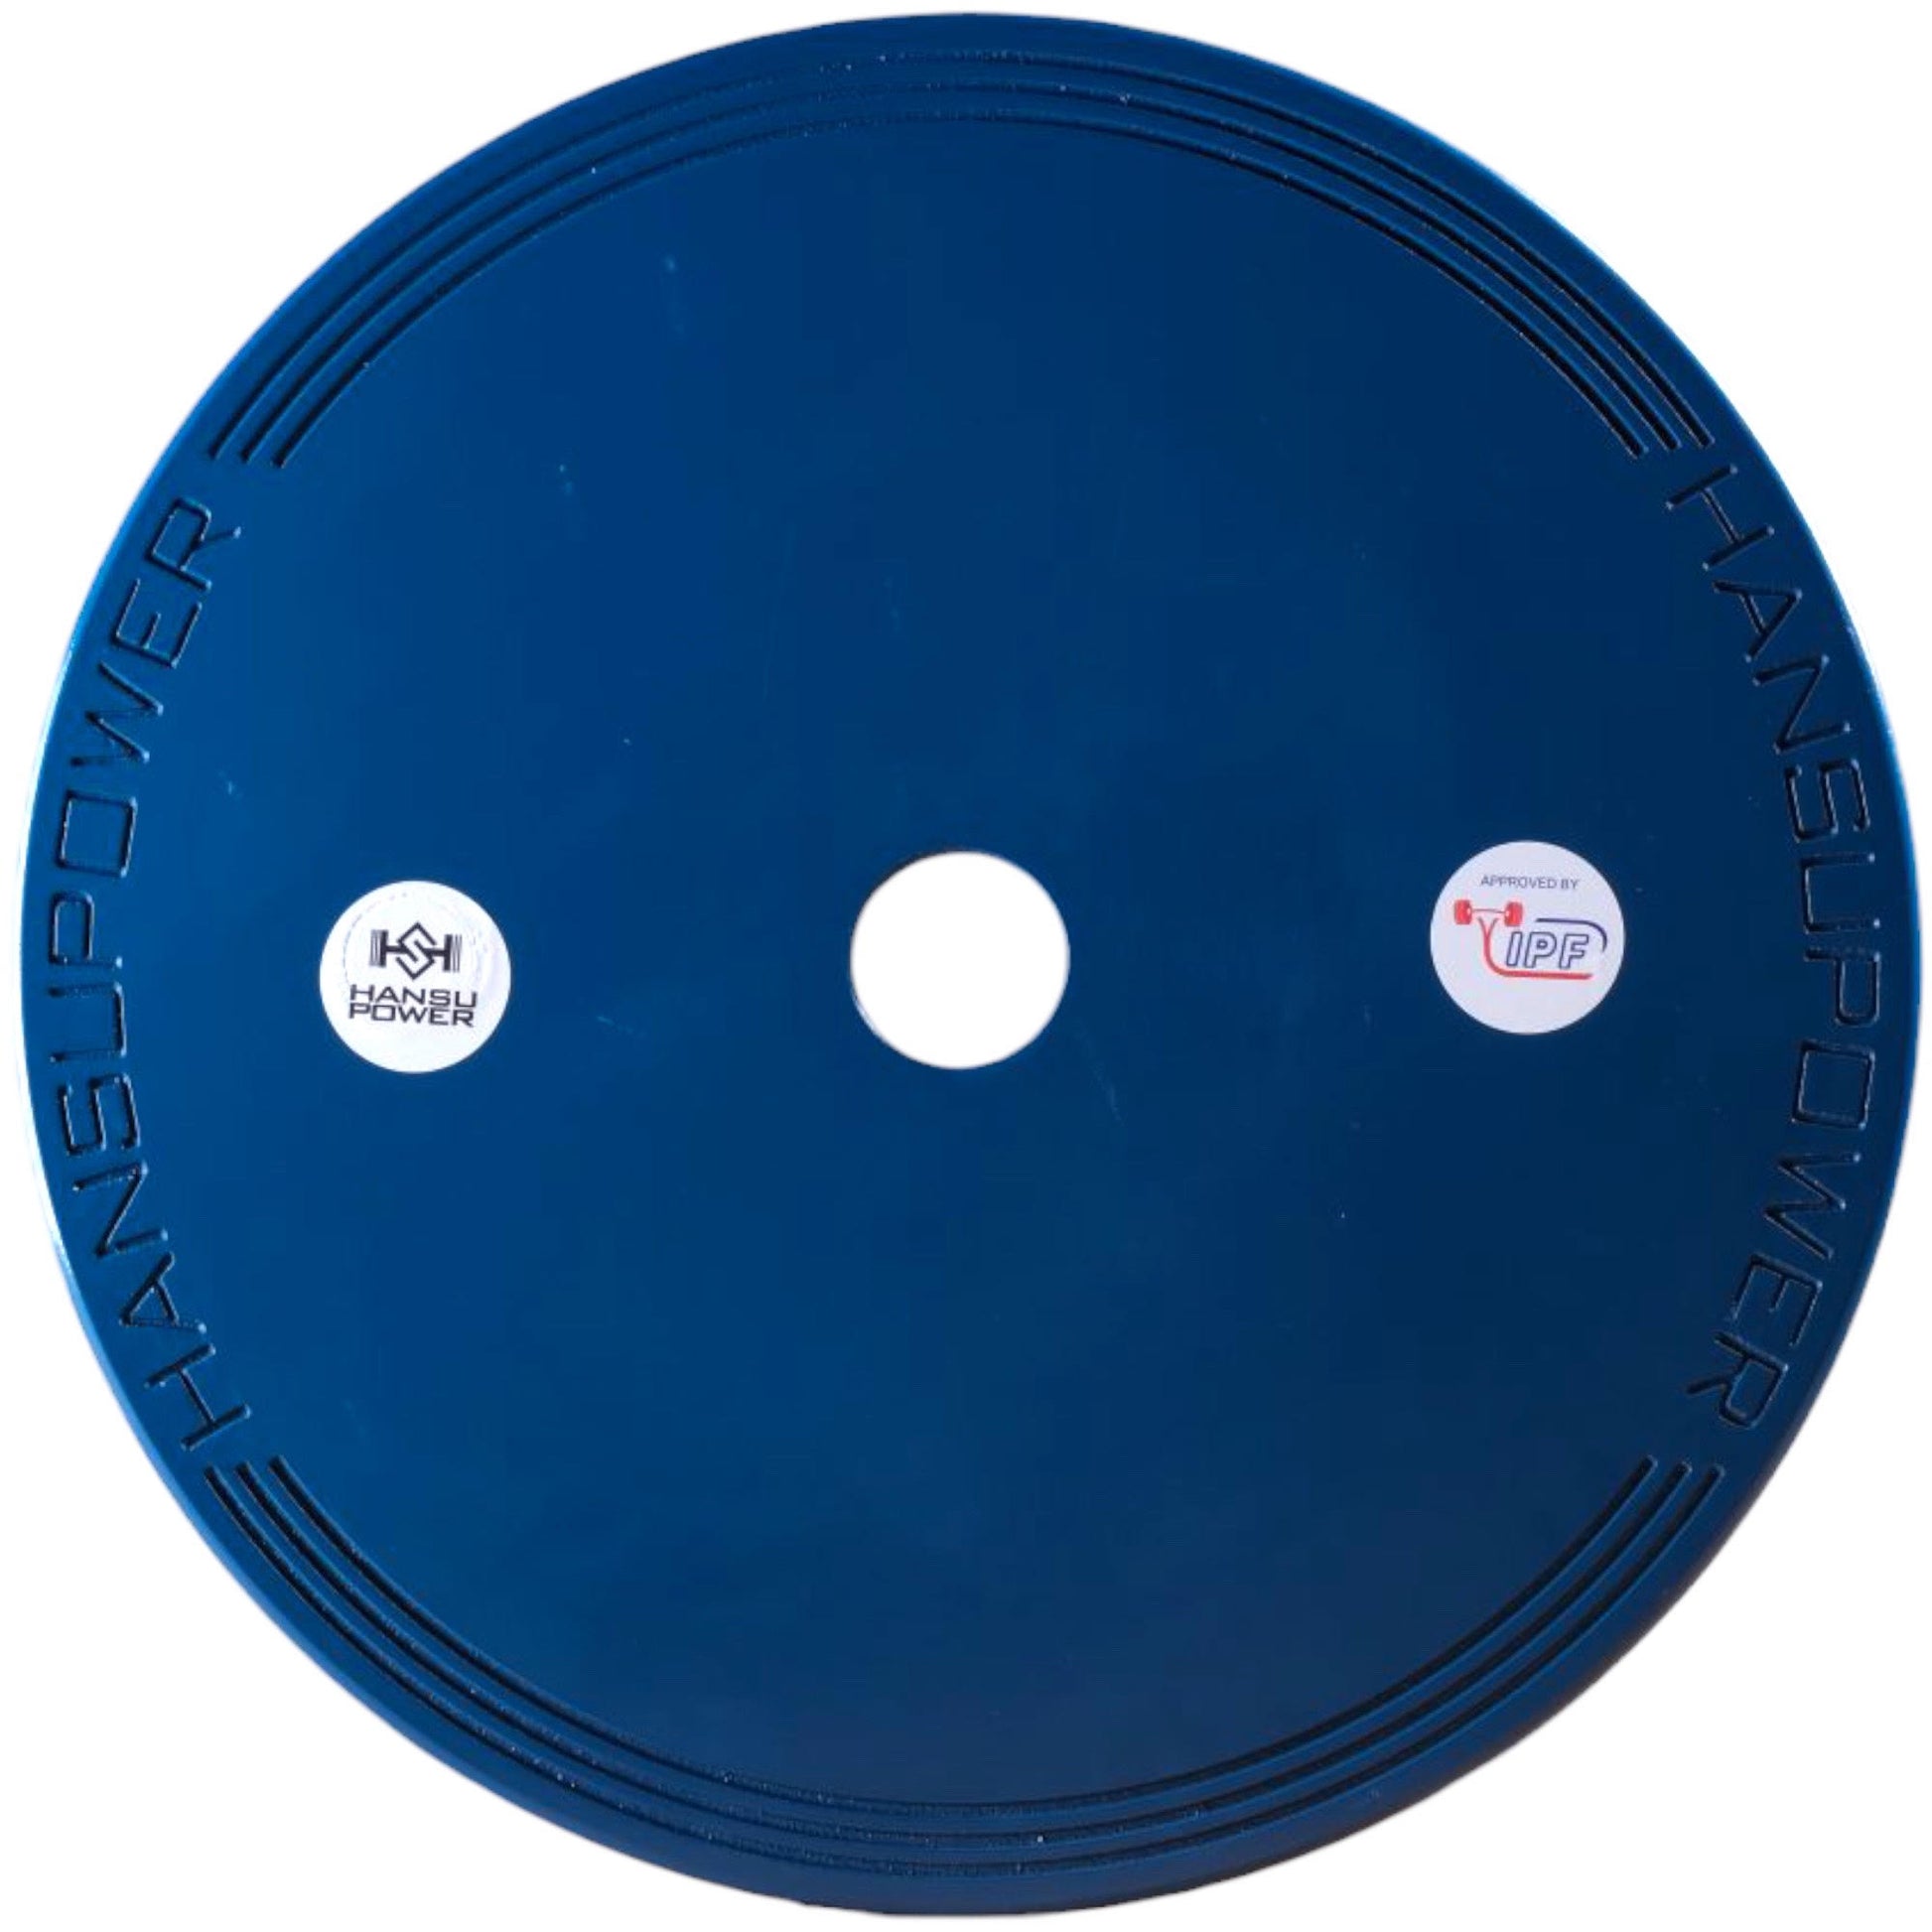 HANSU POWER Powerlifting Calibrated Plates, IPF Approved